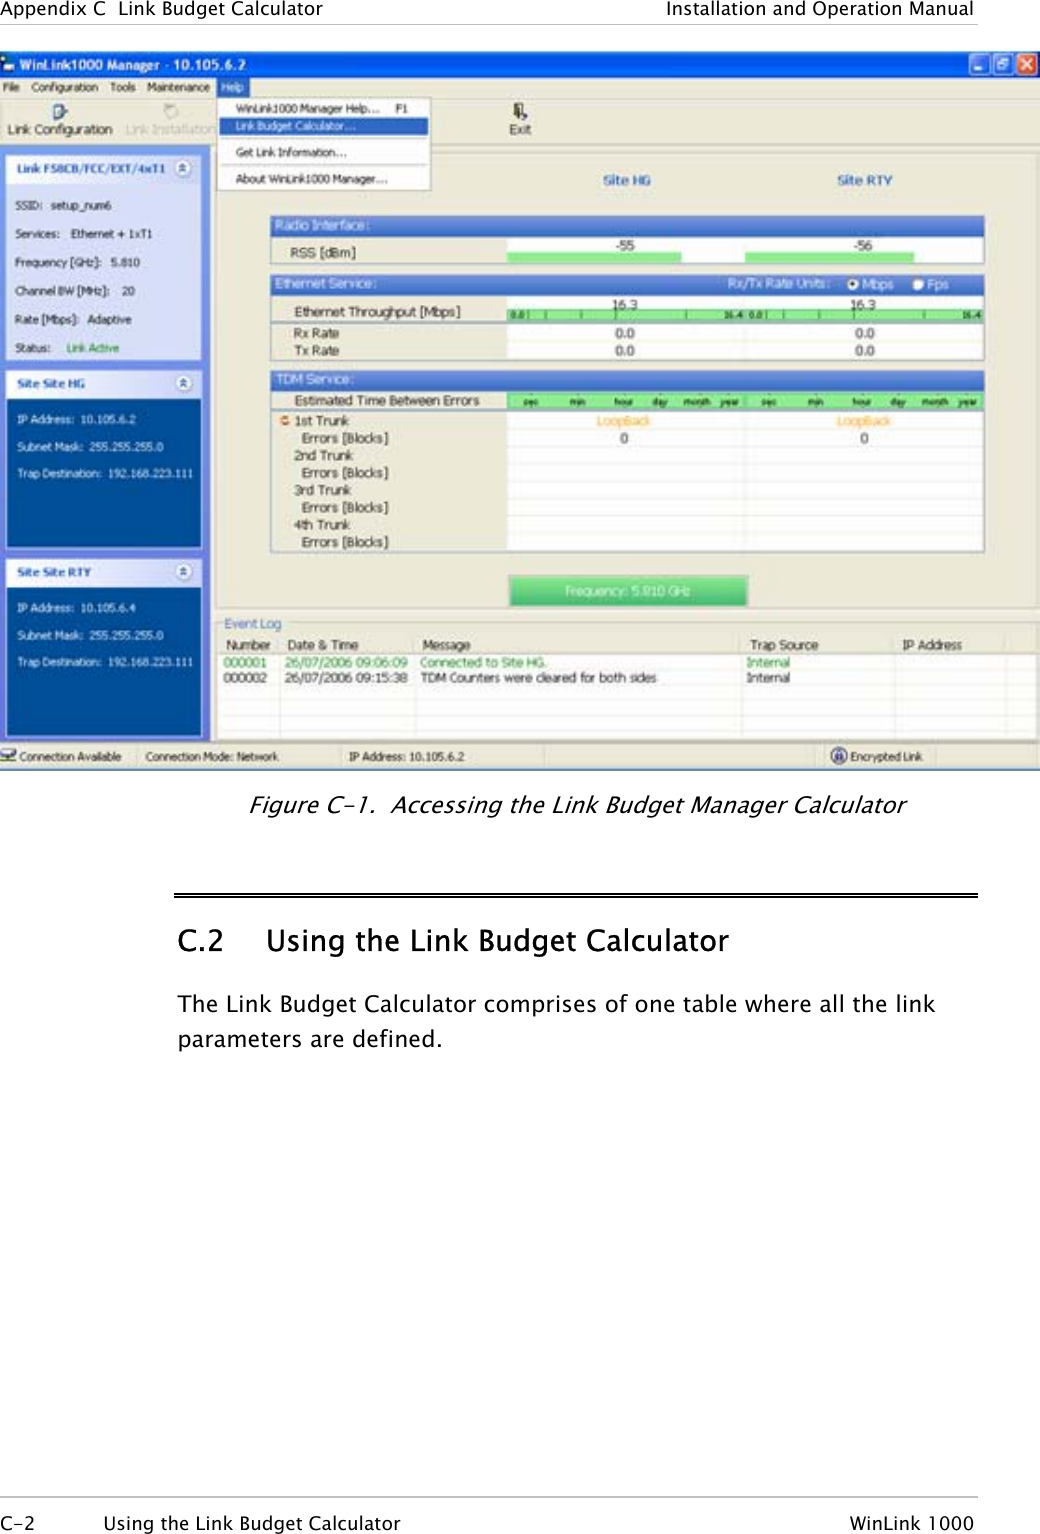 Appendix  C  Link Budget Calculator  Installation and Operation Manual  Figure  C-1.  Accessing the Link Budget Manager Calculator C.2 Using the Link Budget Calculator The Link Budget Calculator comprises of one table where all the link parameters are defined. C-2  Using the Link Budget Calculator  WinLink 1000  